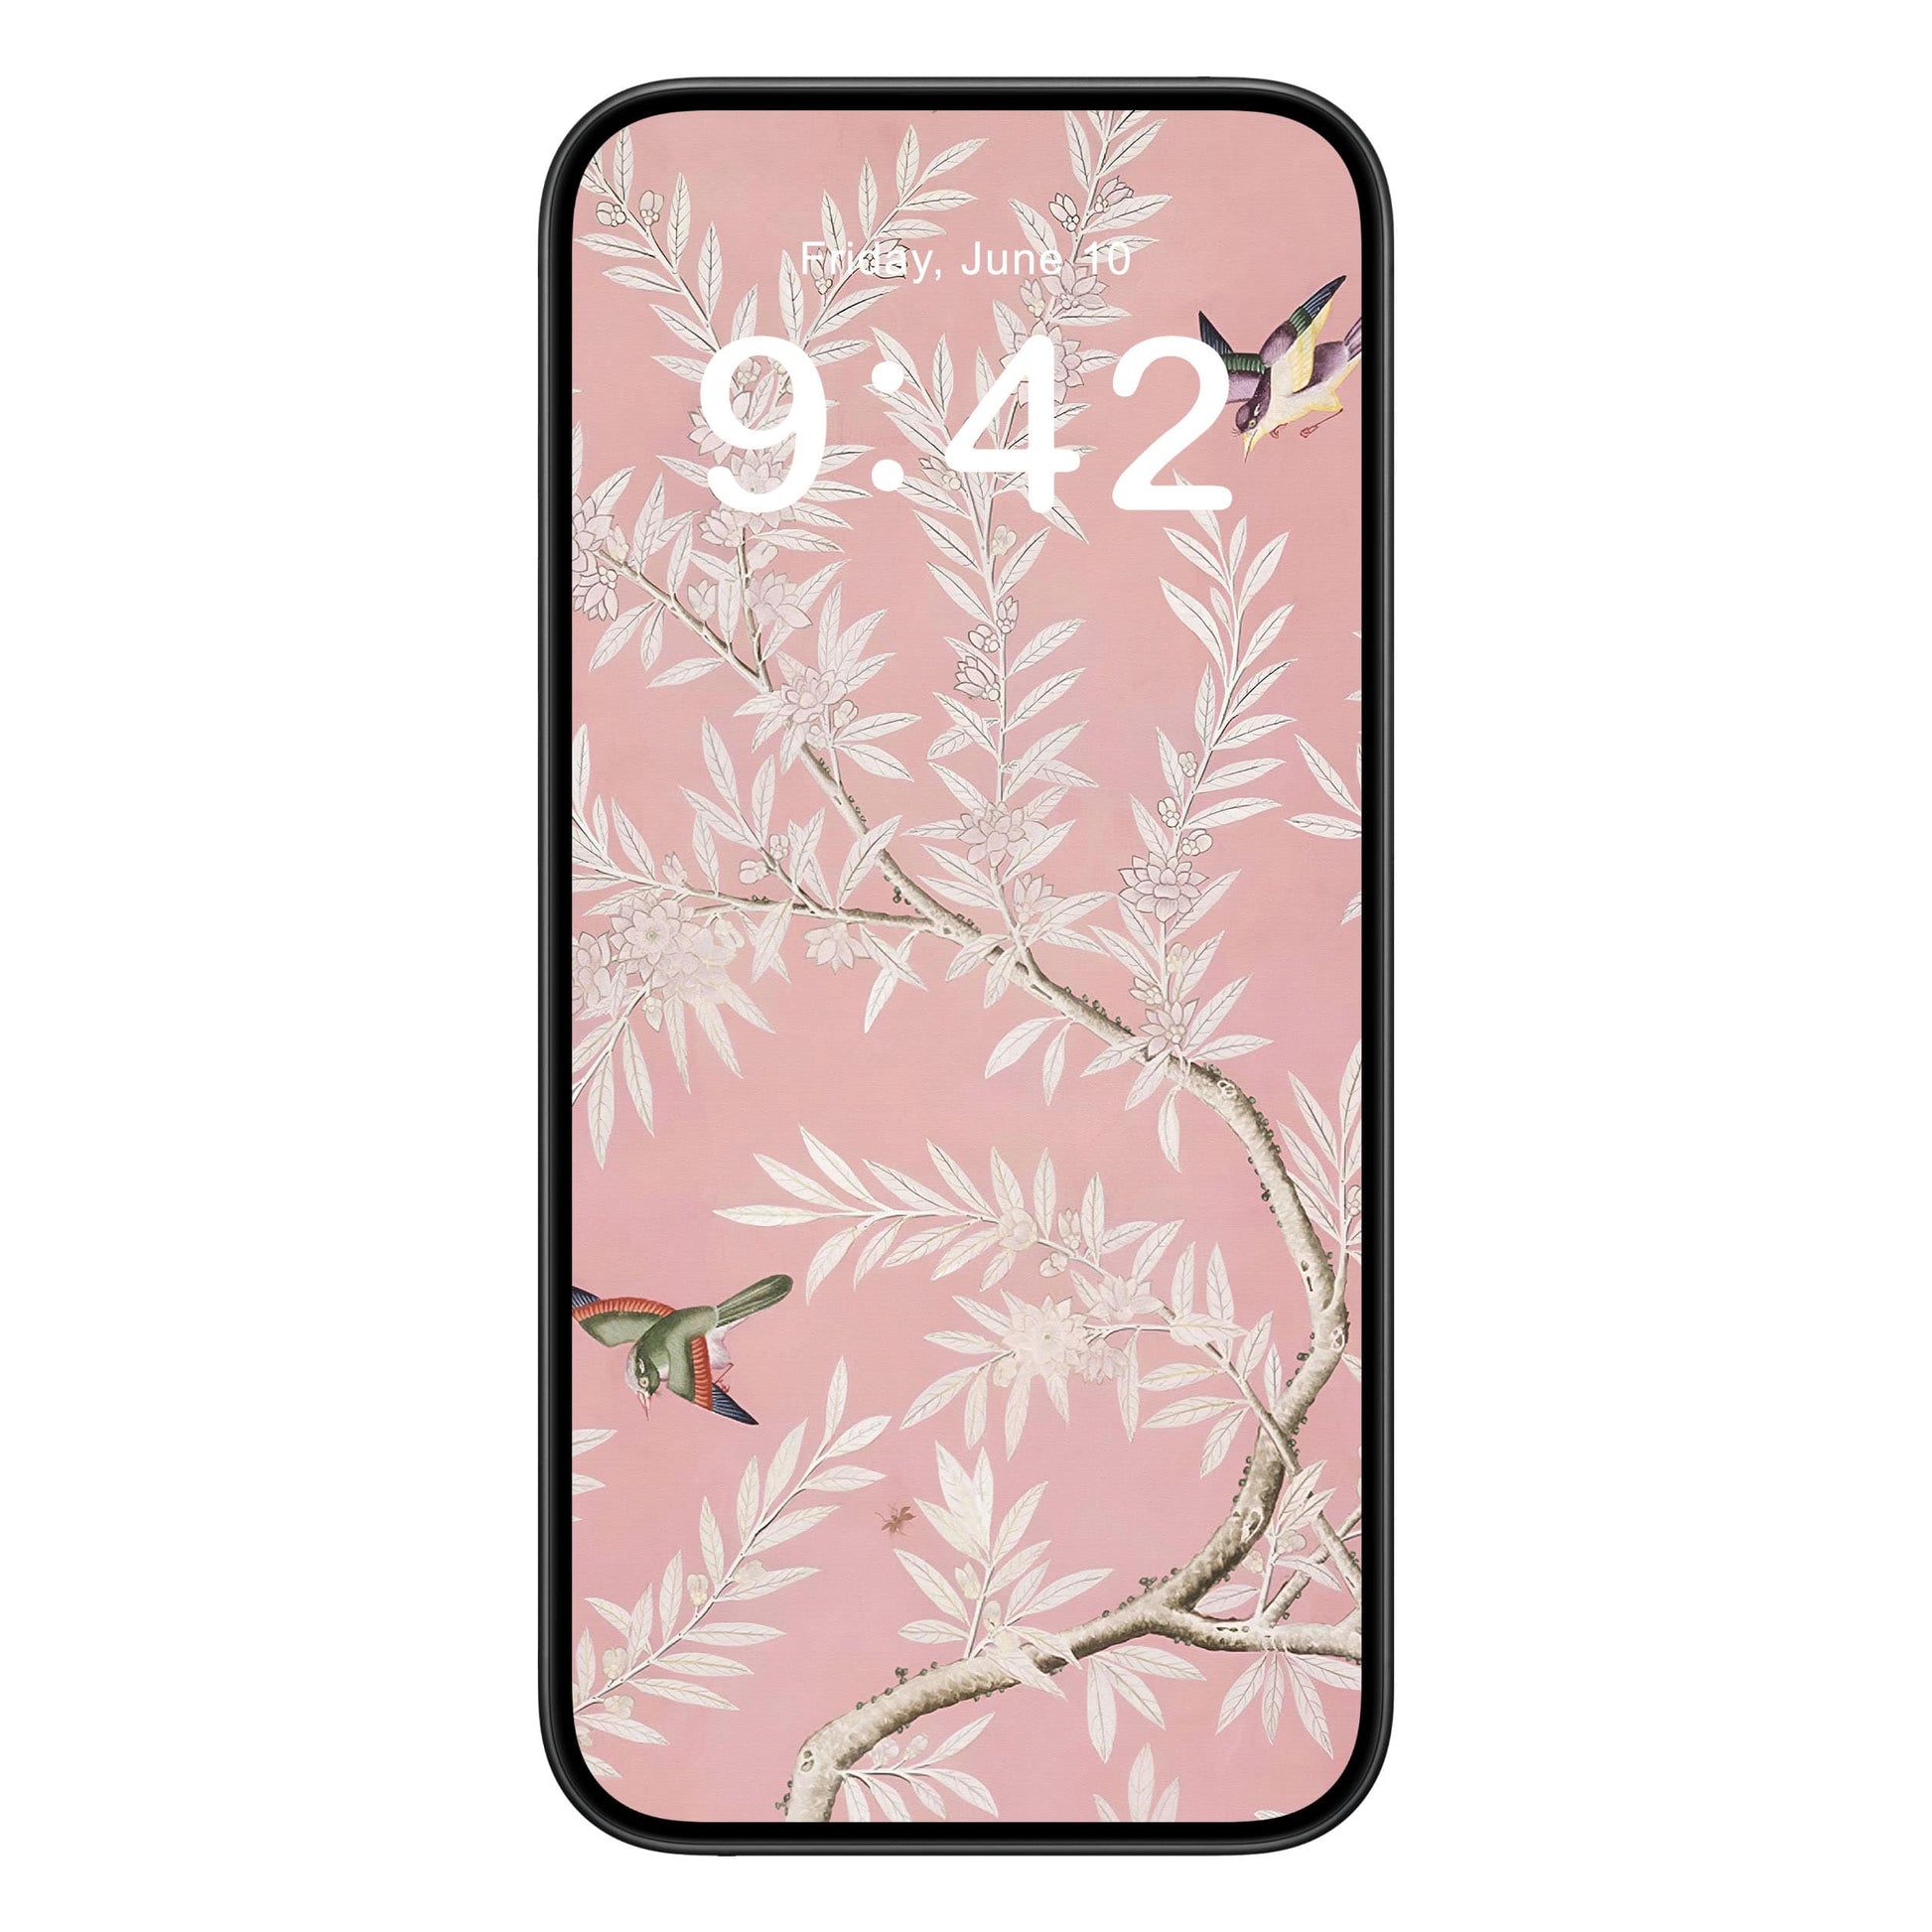 Pink Floral phone wallpaper background with botanical design shown on a phone lock screen, instant download available.